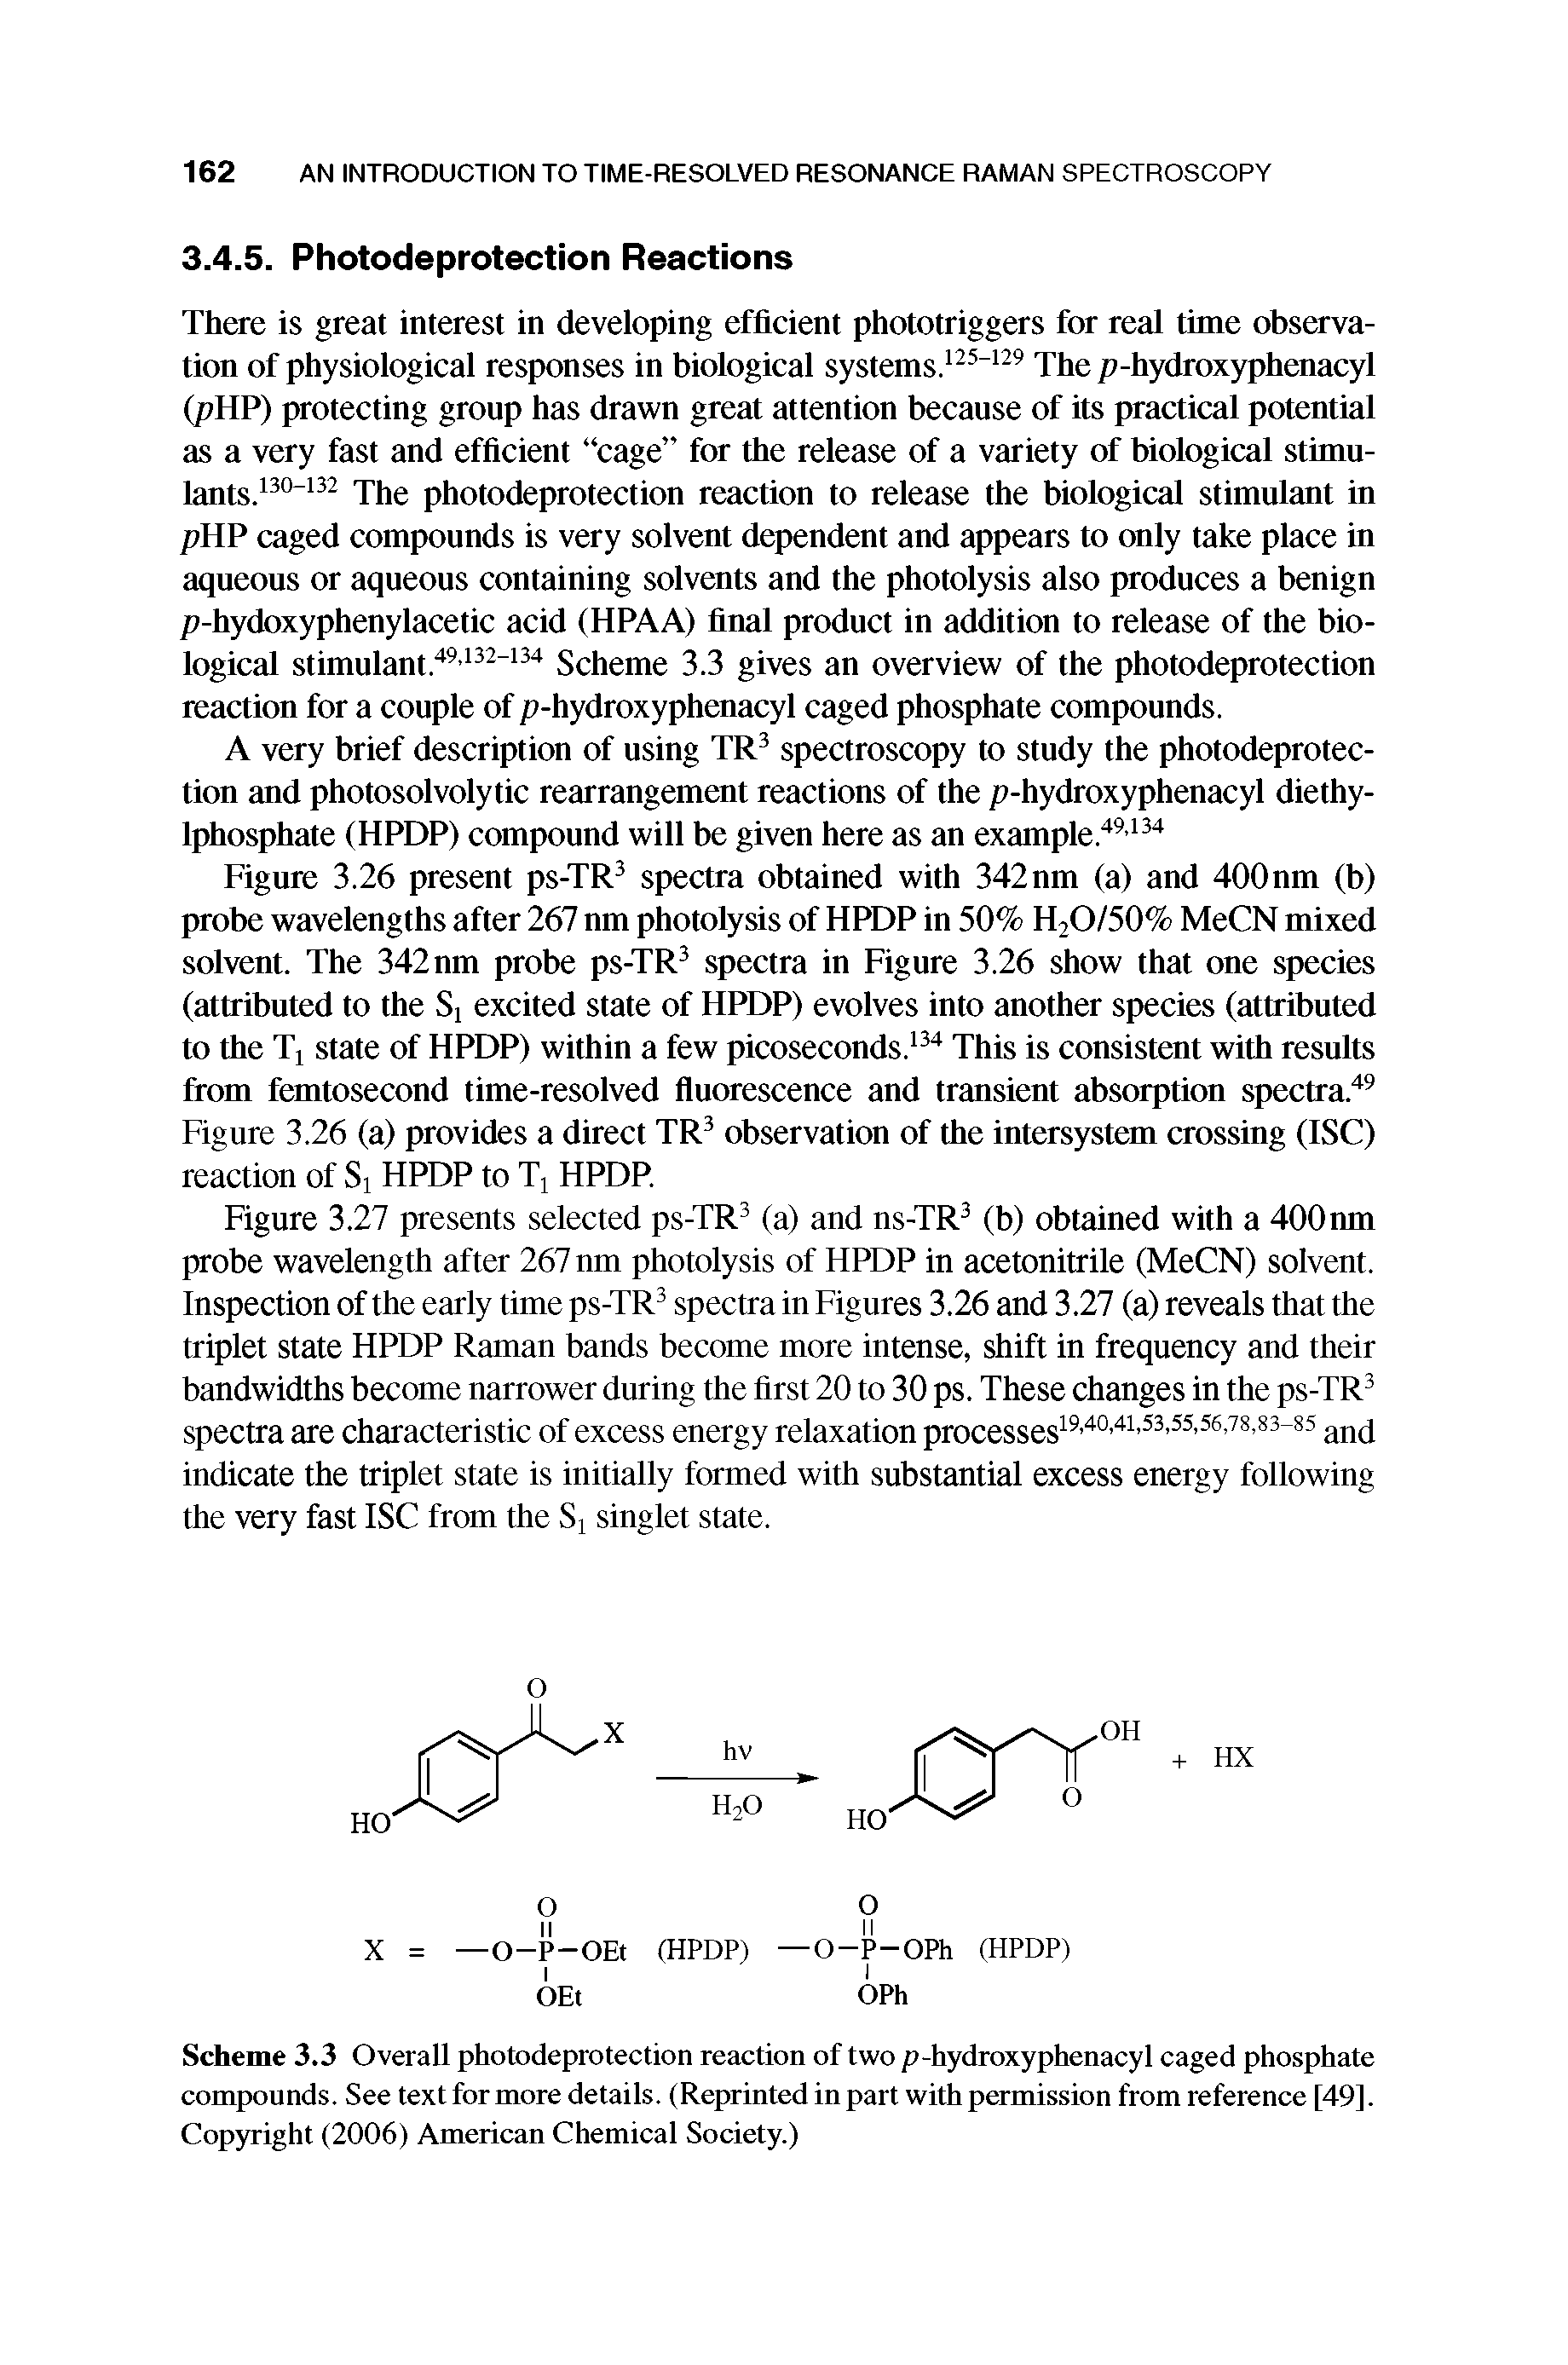 Scheme 3.3 Overall photodeprotection reaction of two p-hydroxyphenacyl caged phosphate compounds. See text for more details. (Reprinted in part with permission from reference [49]. Copyright (2006) American Chemical Society.)...